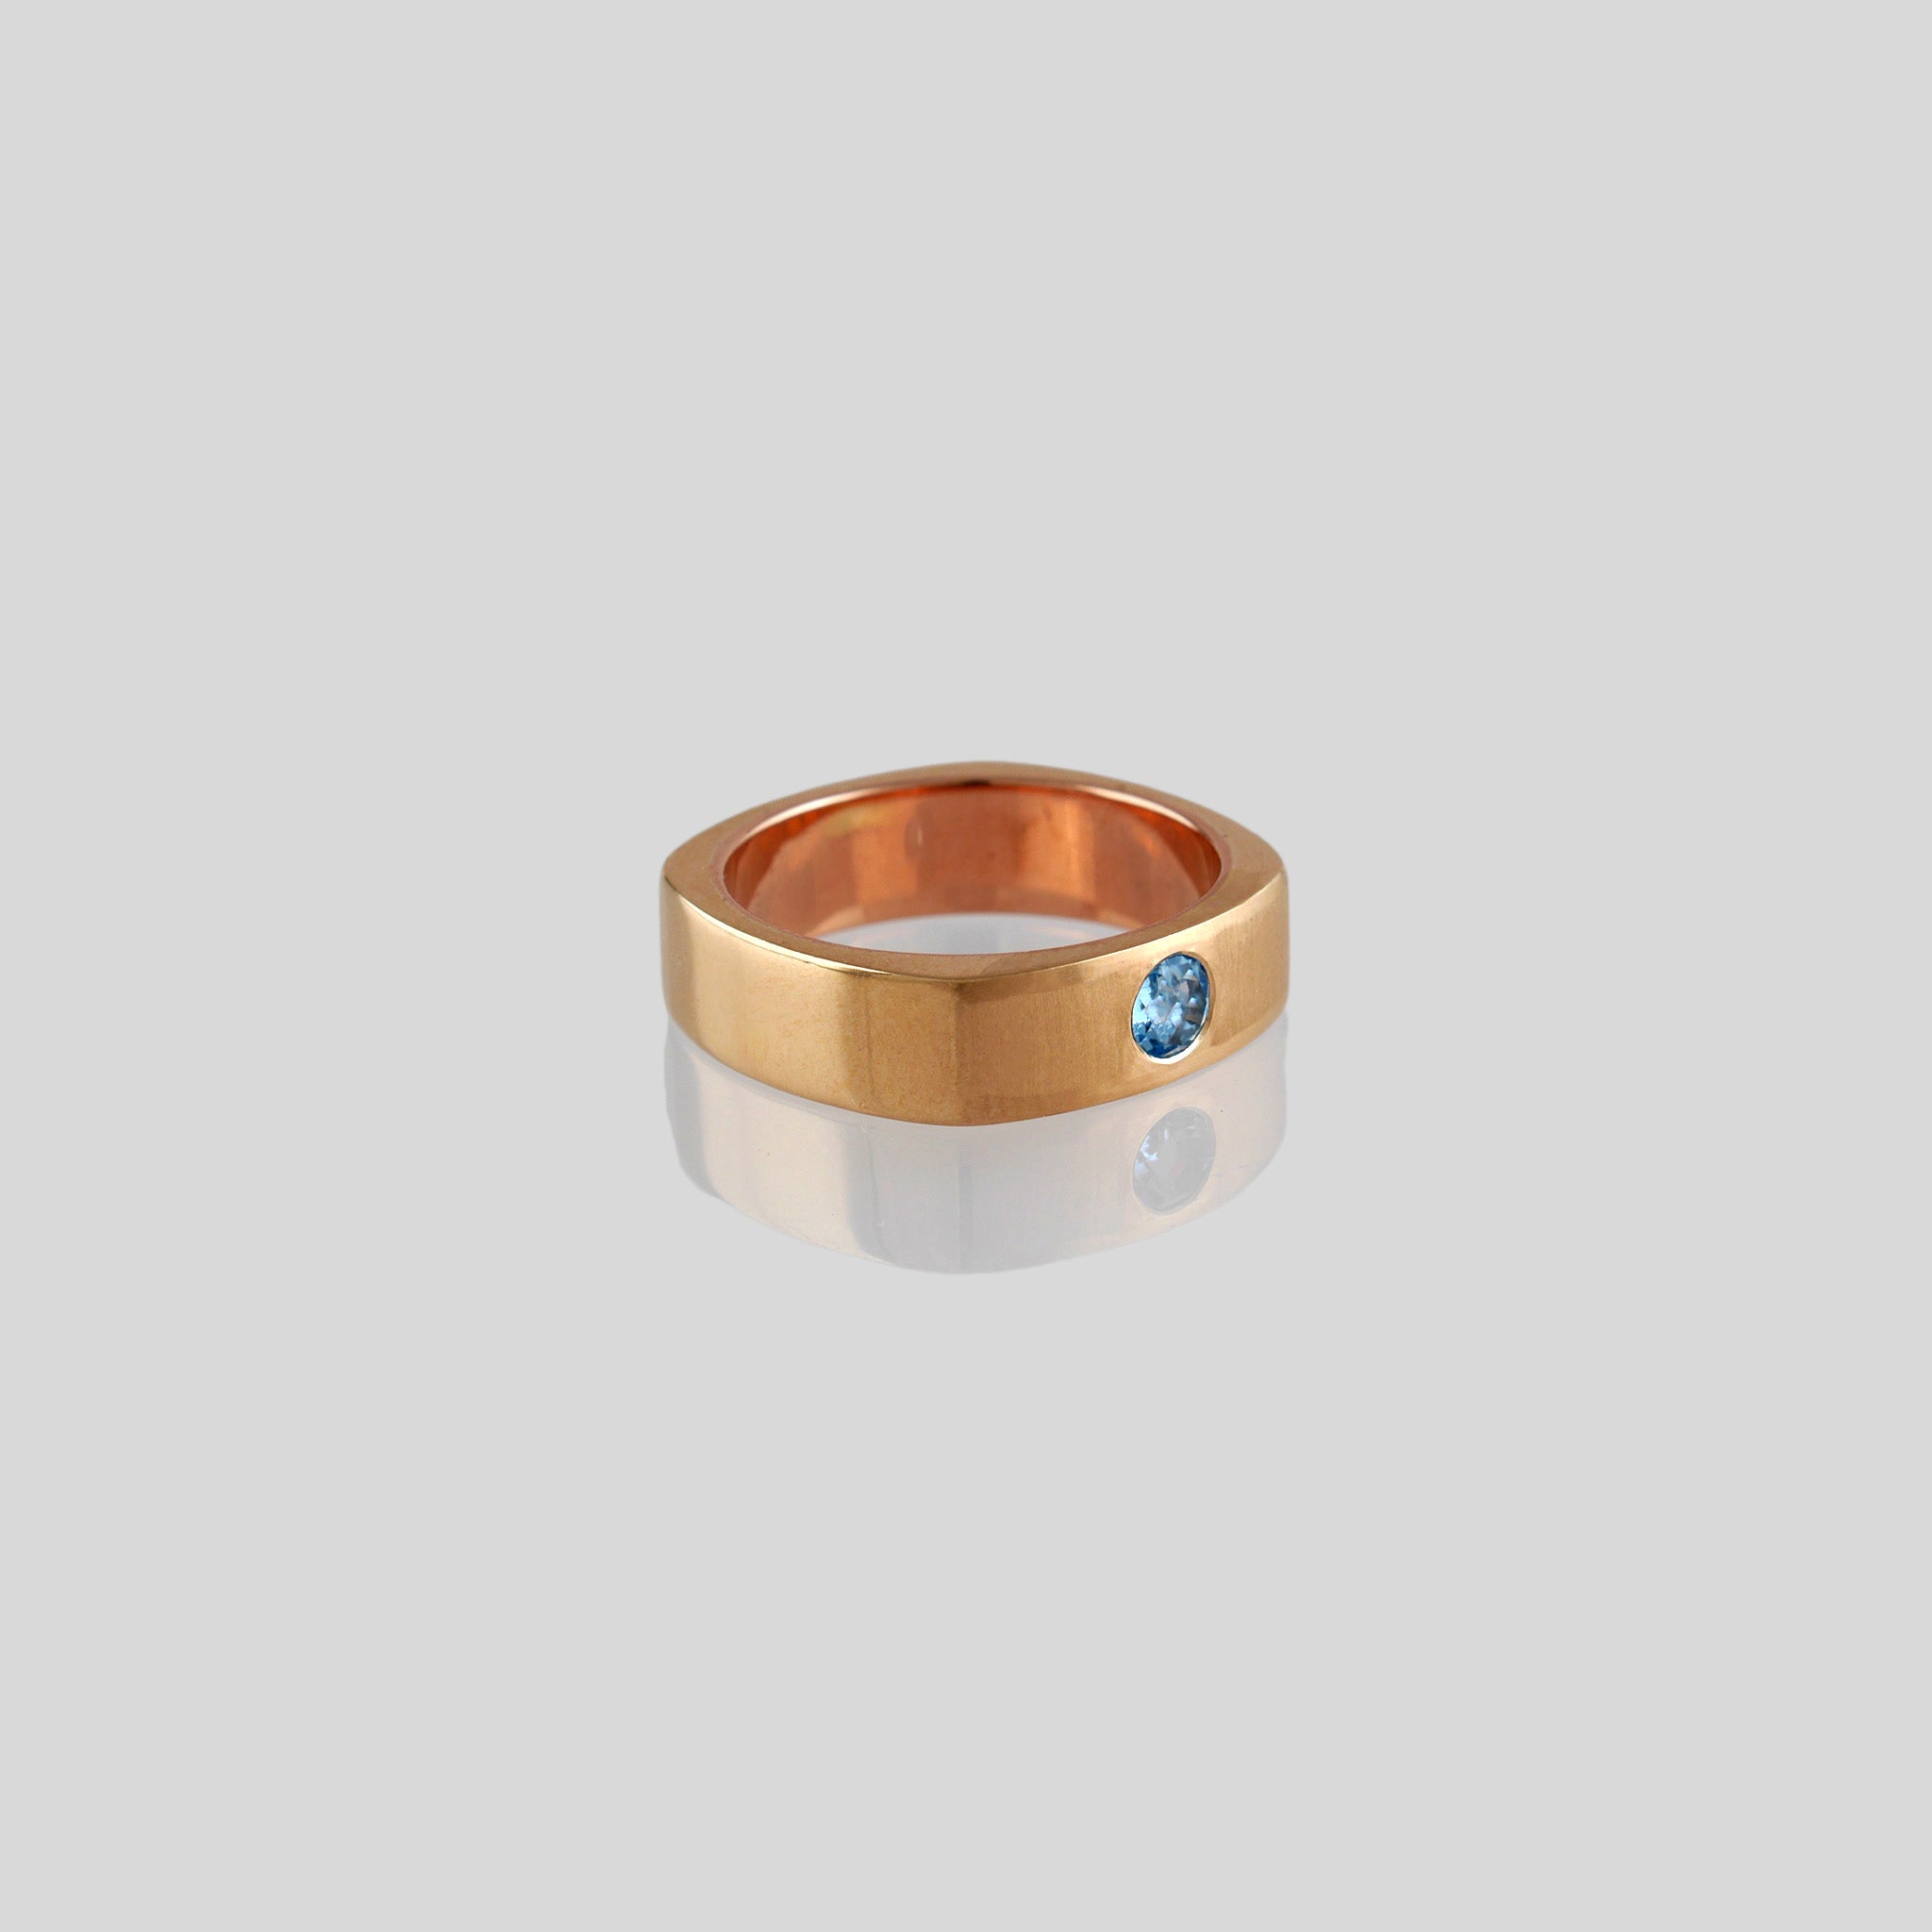 Square ring with rounded edges, symbolizing 'rounding the square,' crafted from 18k Rose Gold and adorned with Blue Topaz. A metaphor for overcoming challenges with grace and elegance.